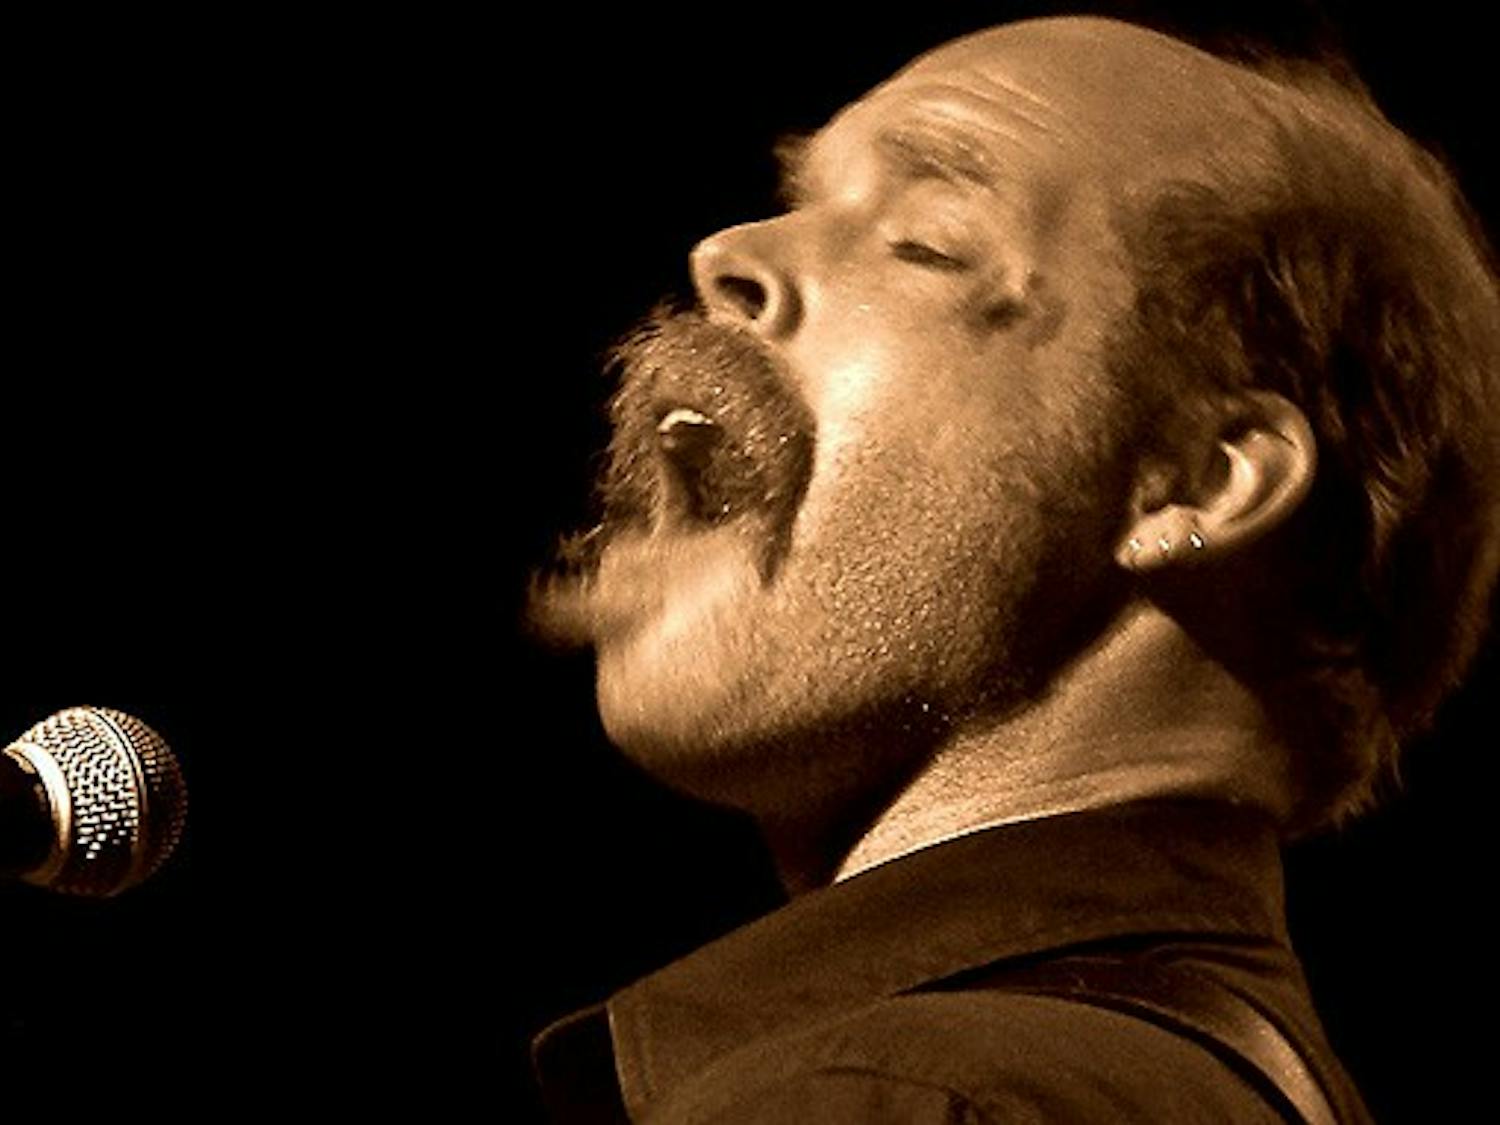 Will Oldham, aka Bonnie “Prince” Billy, is a highly regarded folk artist whose work has been covered by the likes of Johnny Cash. He’s touring behind his most recent album, The Wonder Show of the World.